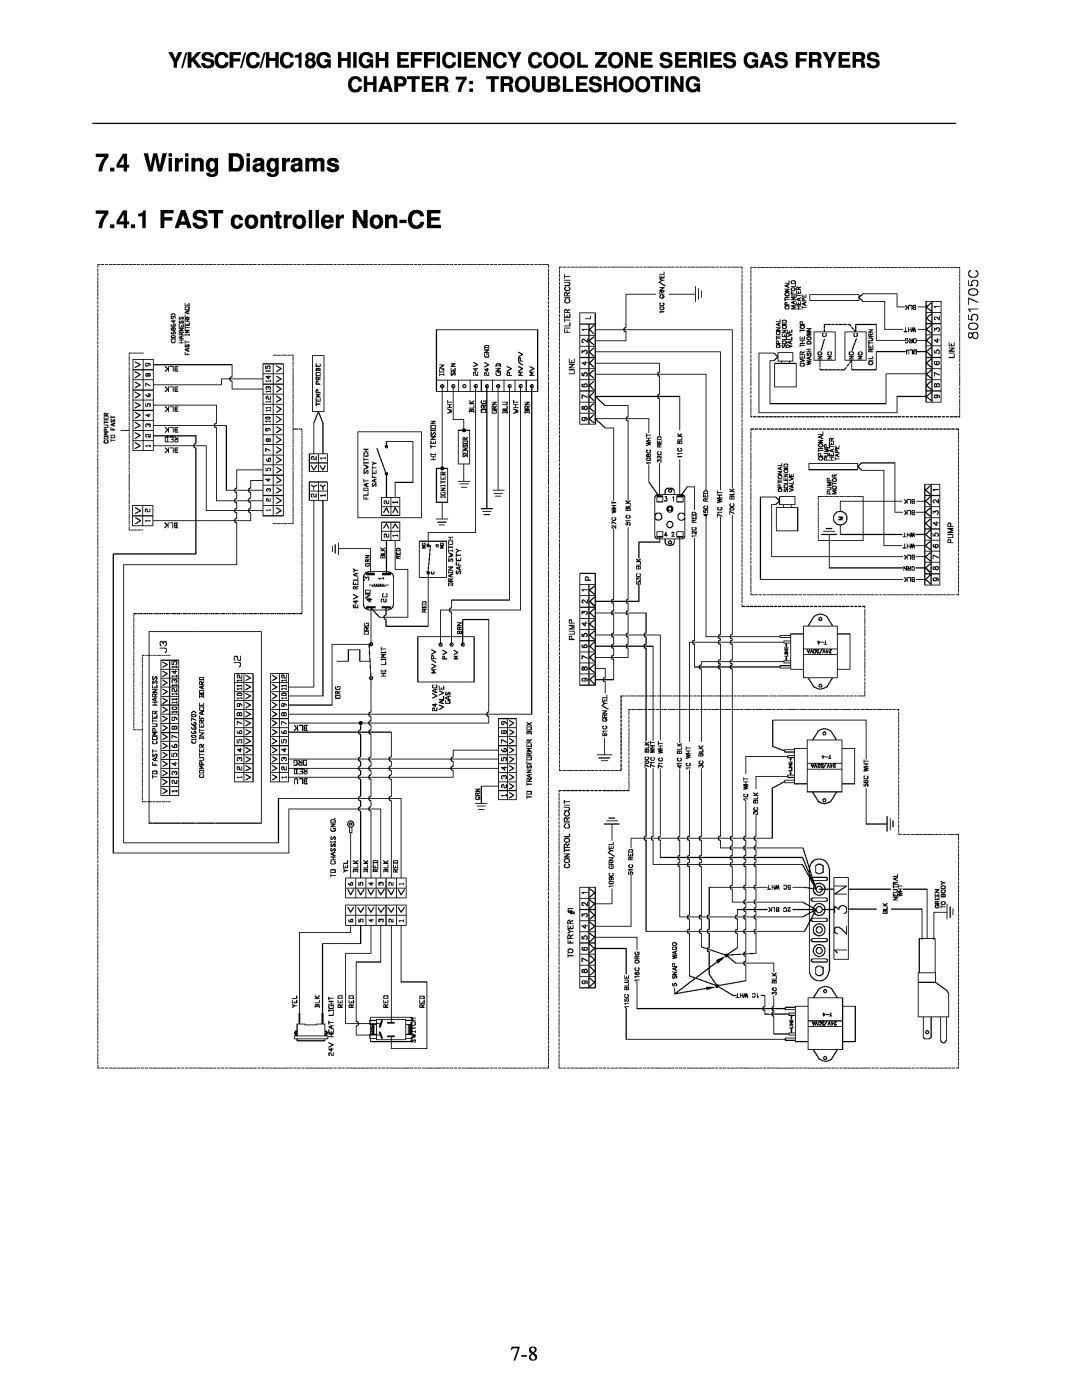 Frymaster Y/KSCF/C/HC18G operation manual Wiring Diagrams 7.4.1 FAST controller Non-CE, Troubleshooting 